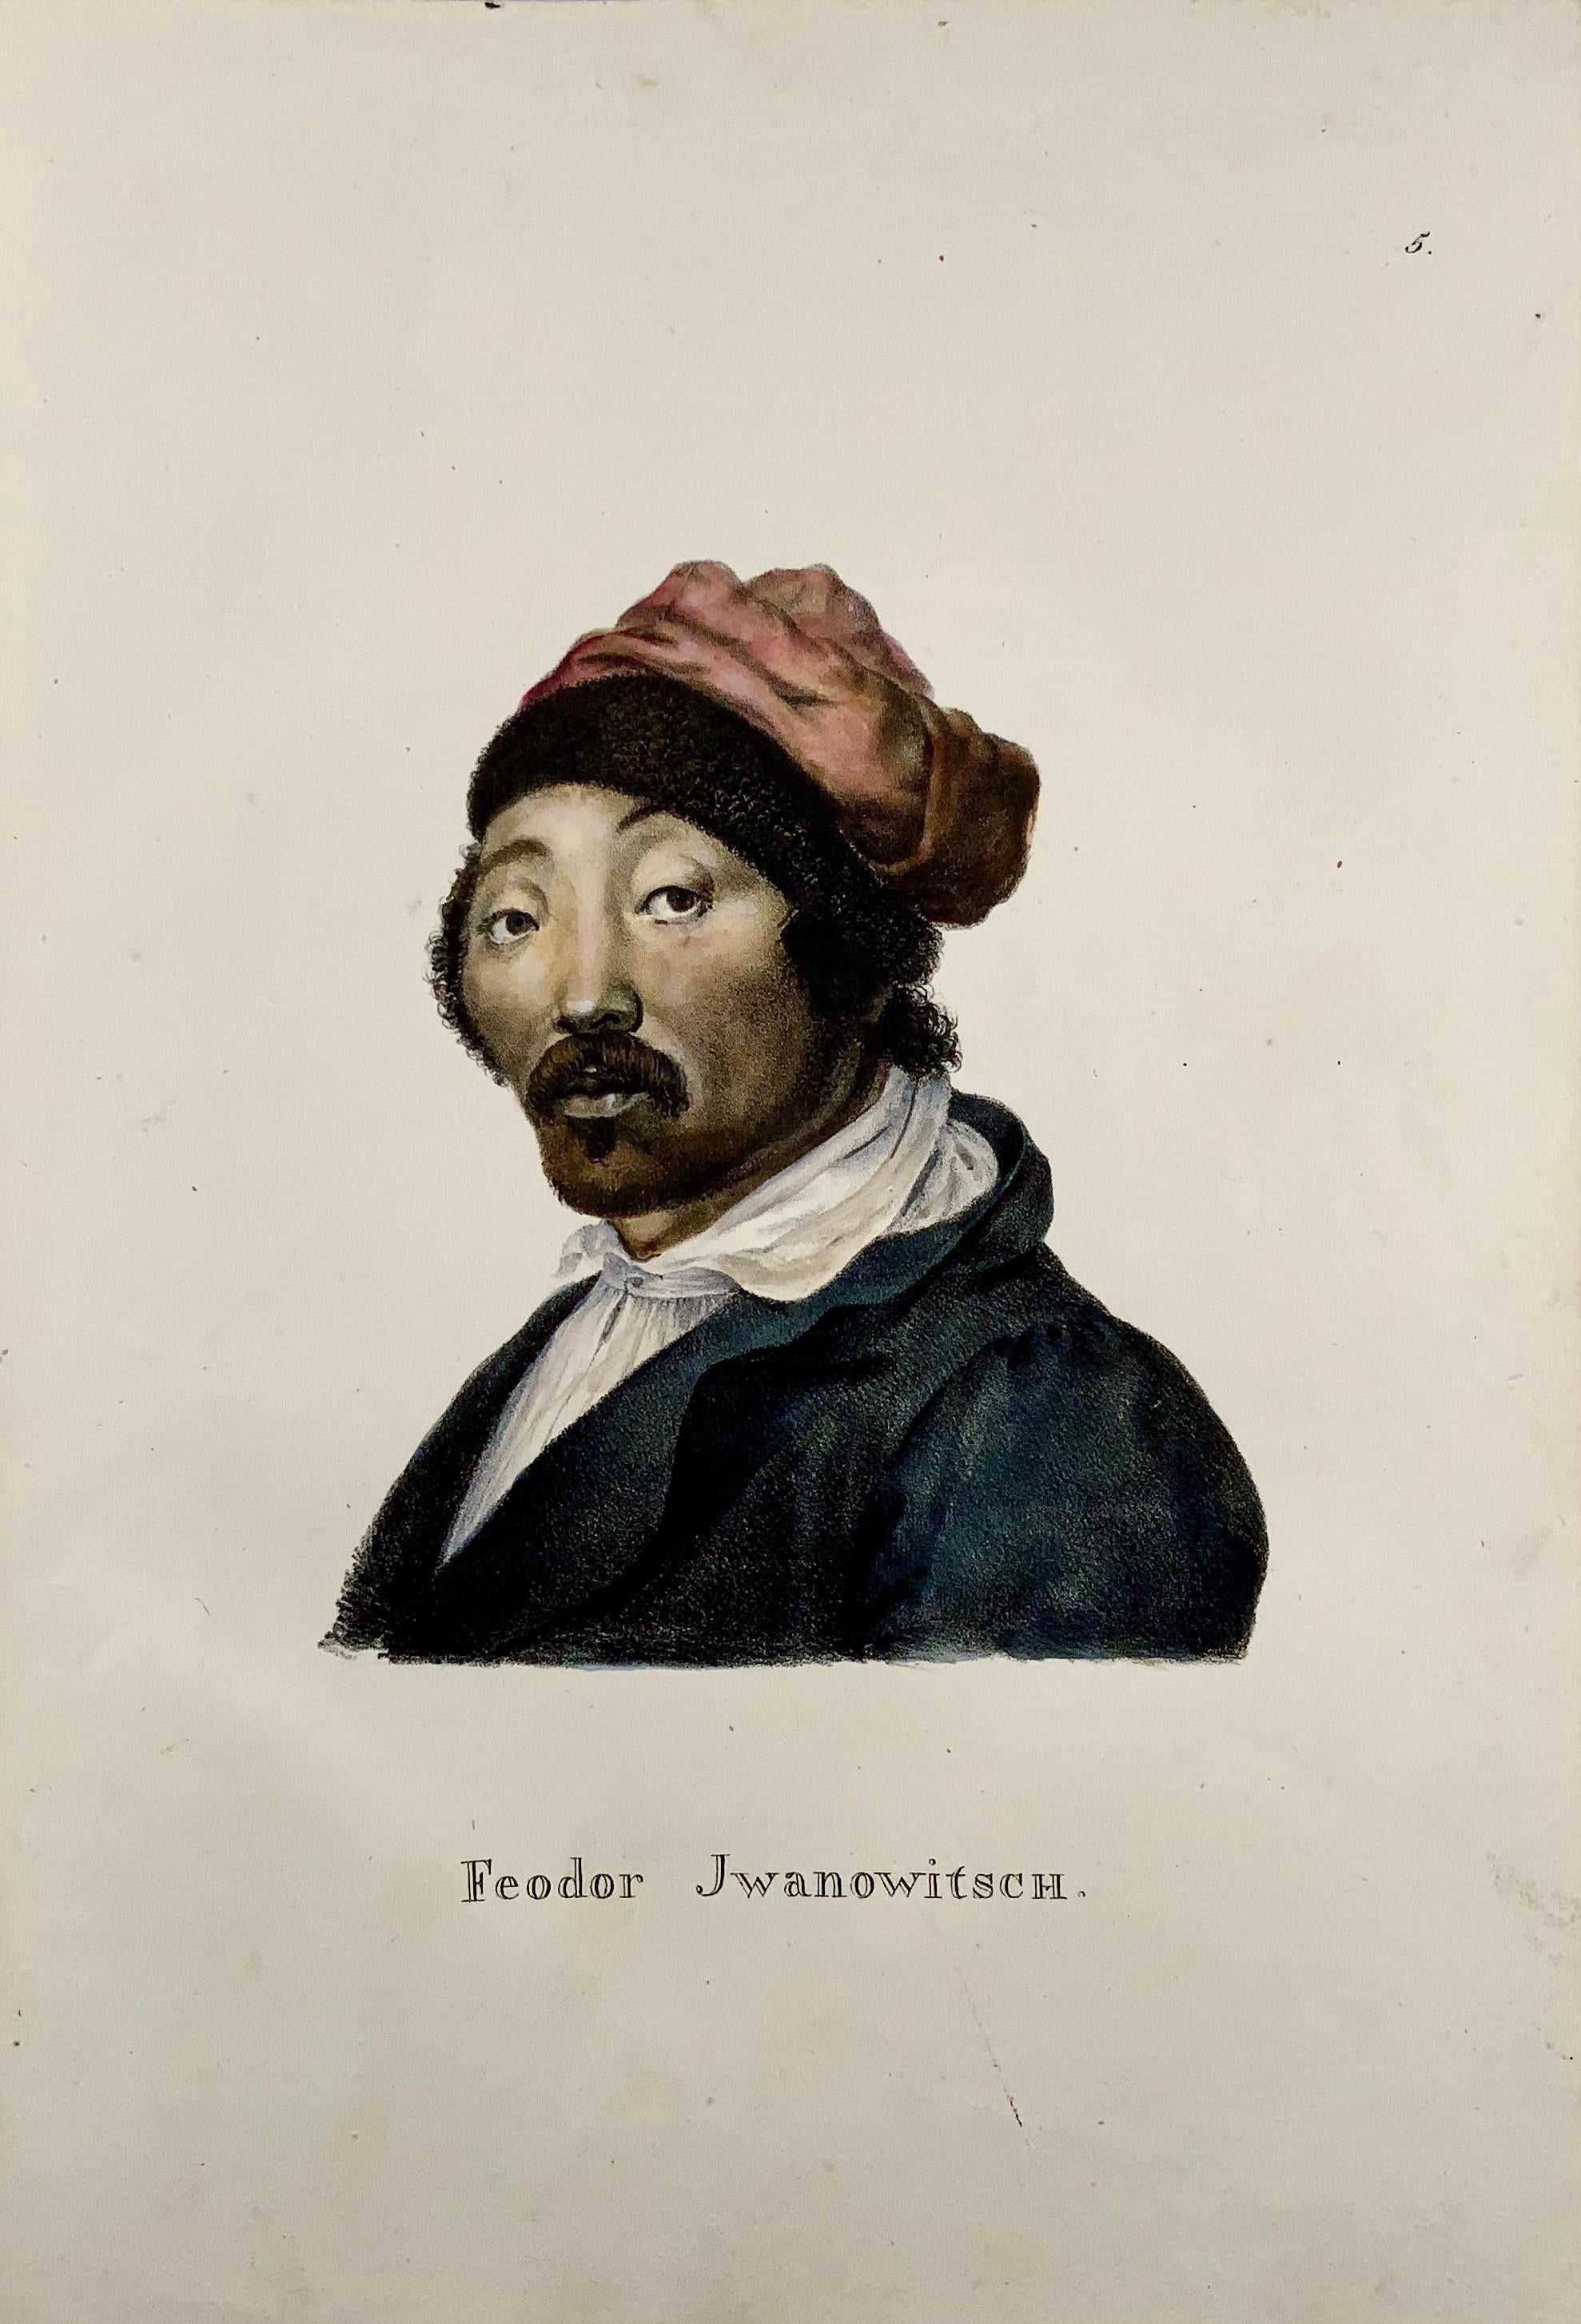 An early folio stone lithograph portrait of Fedor Iwanowitsch (1765-1832); head and shoulders turned three-quarters to the left. He has a moustache with a slight beard, and wears a fur-trimmed cap. 

Lithograph atttributed to the famed